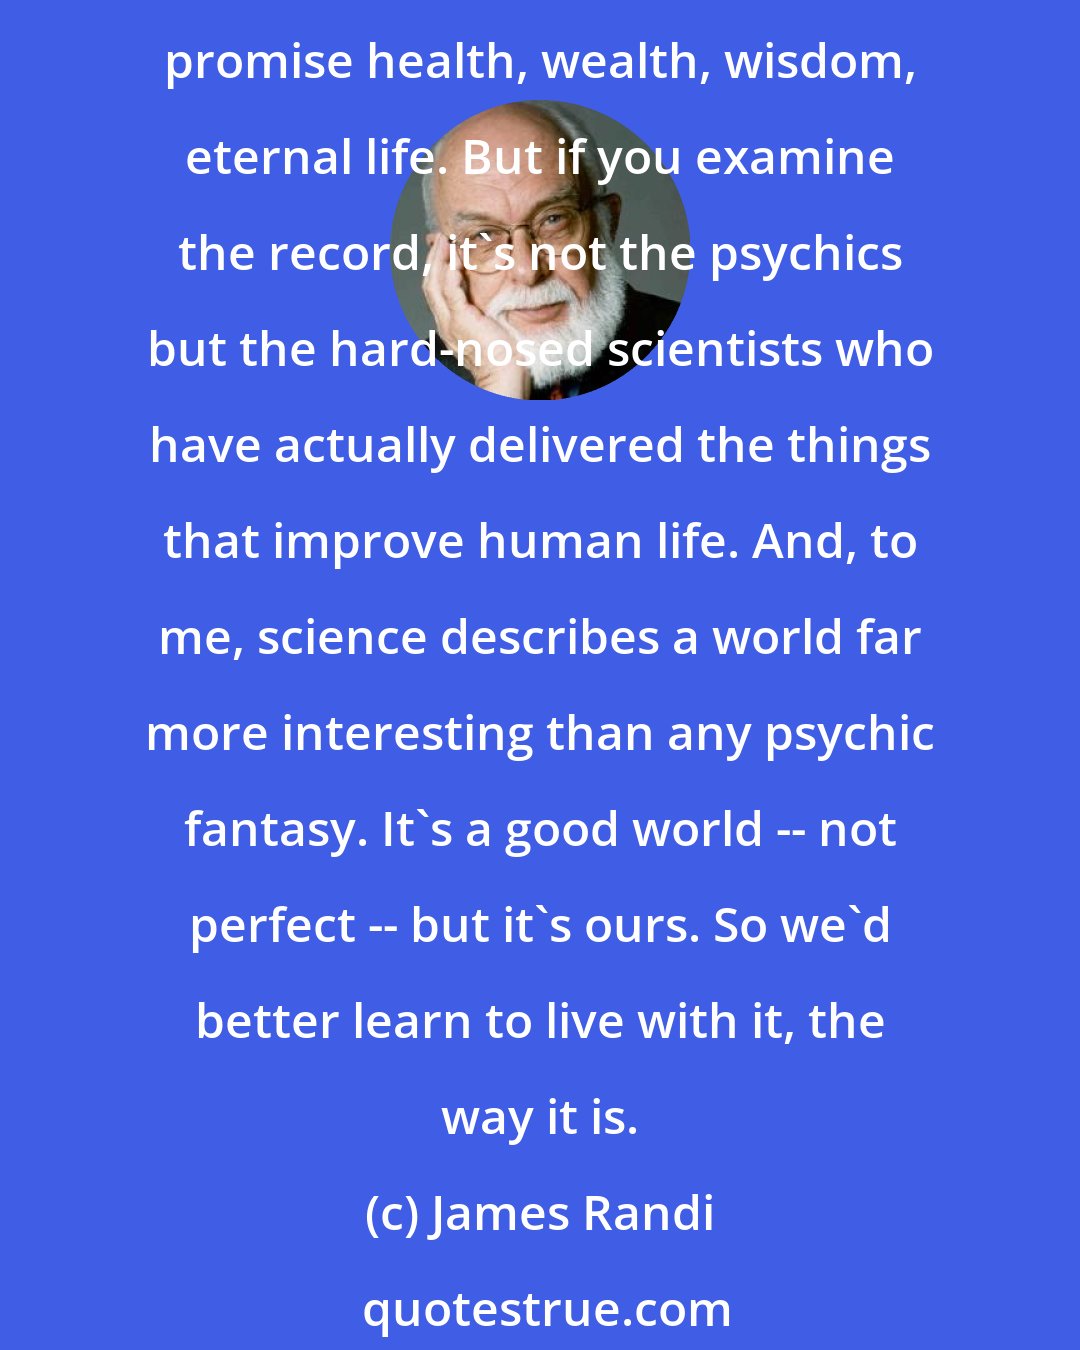 James Randi: A lot of people hate my skepticism, and I think I understand why. The psychics offer wonders and endless possibilities in a world that often seems difficult and mundane. They promise health, wealth, wisdom, eternal life. But if you examine the record, it's not the psychics but the hard-nosed scientists who have actually delivered the things that improve human life. And, to me, science describes a world far more interesting than any psychic fantasy. It's a good world -- not perfect -- but it's ours. So we'd better learn to live with it, the way it is.